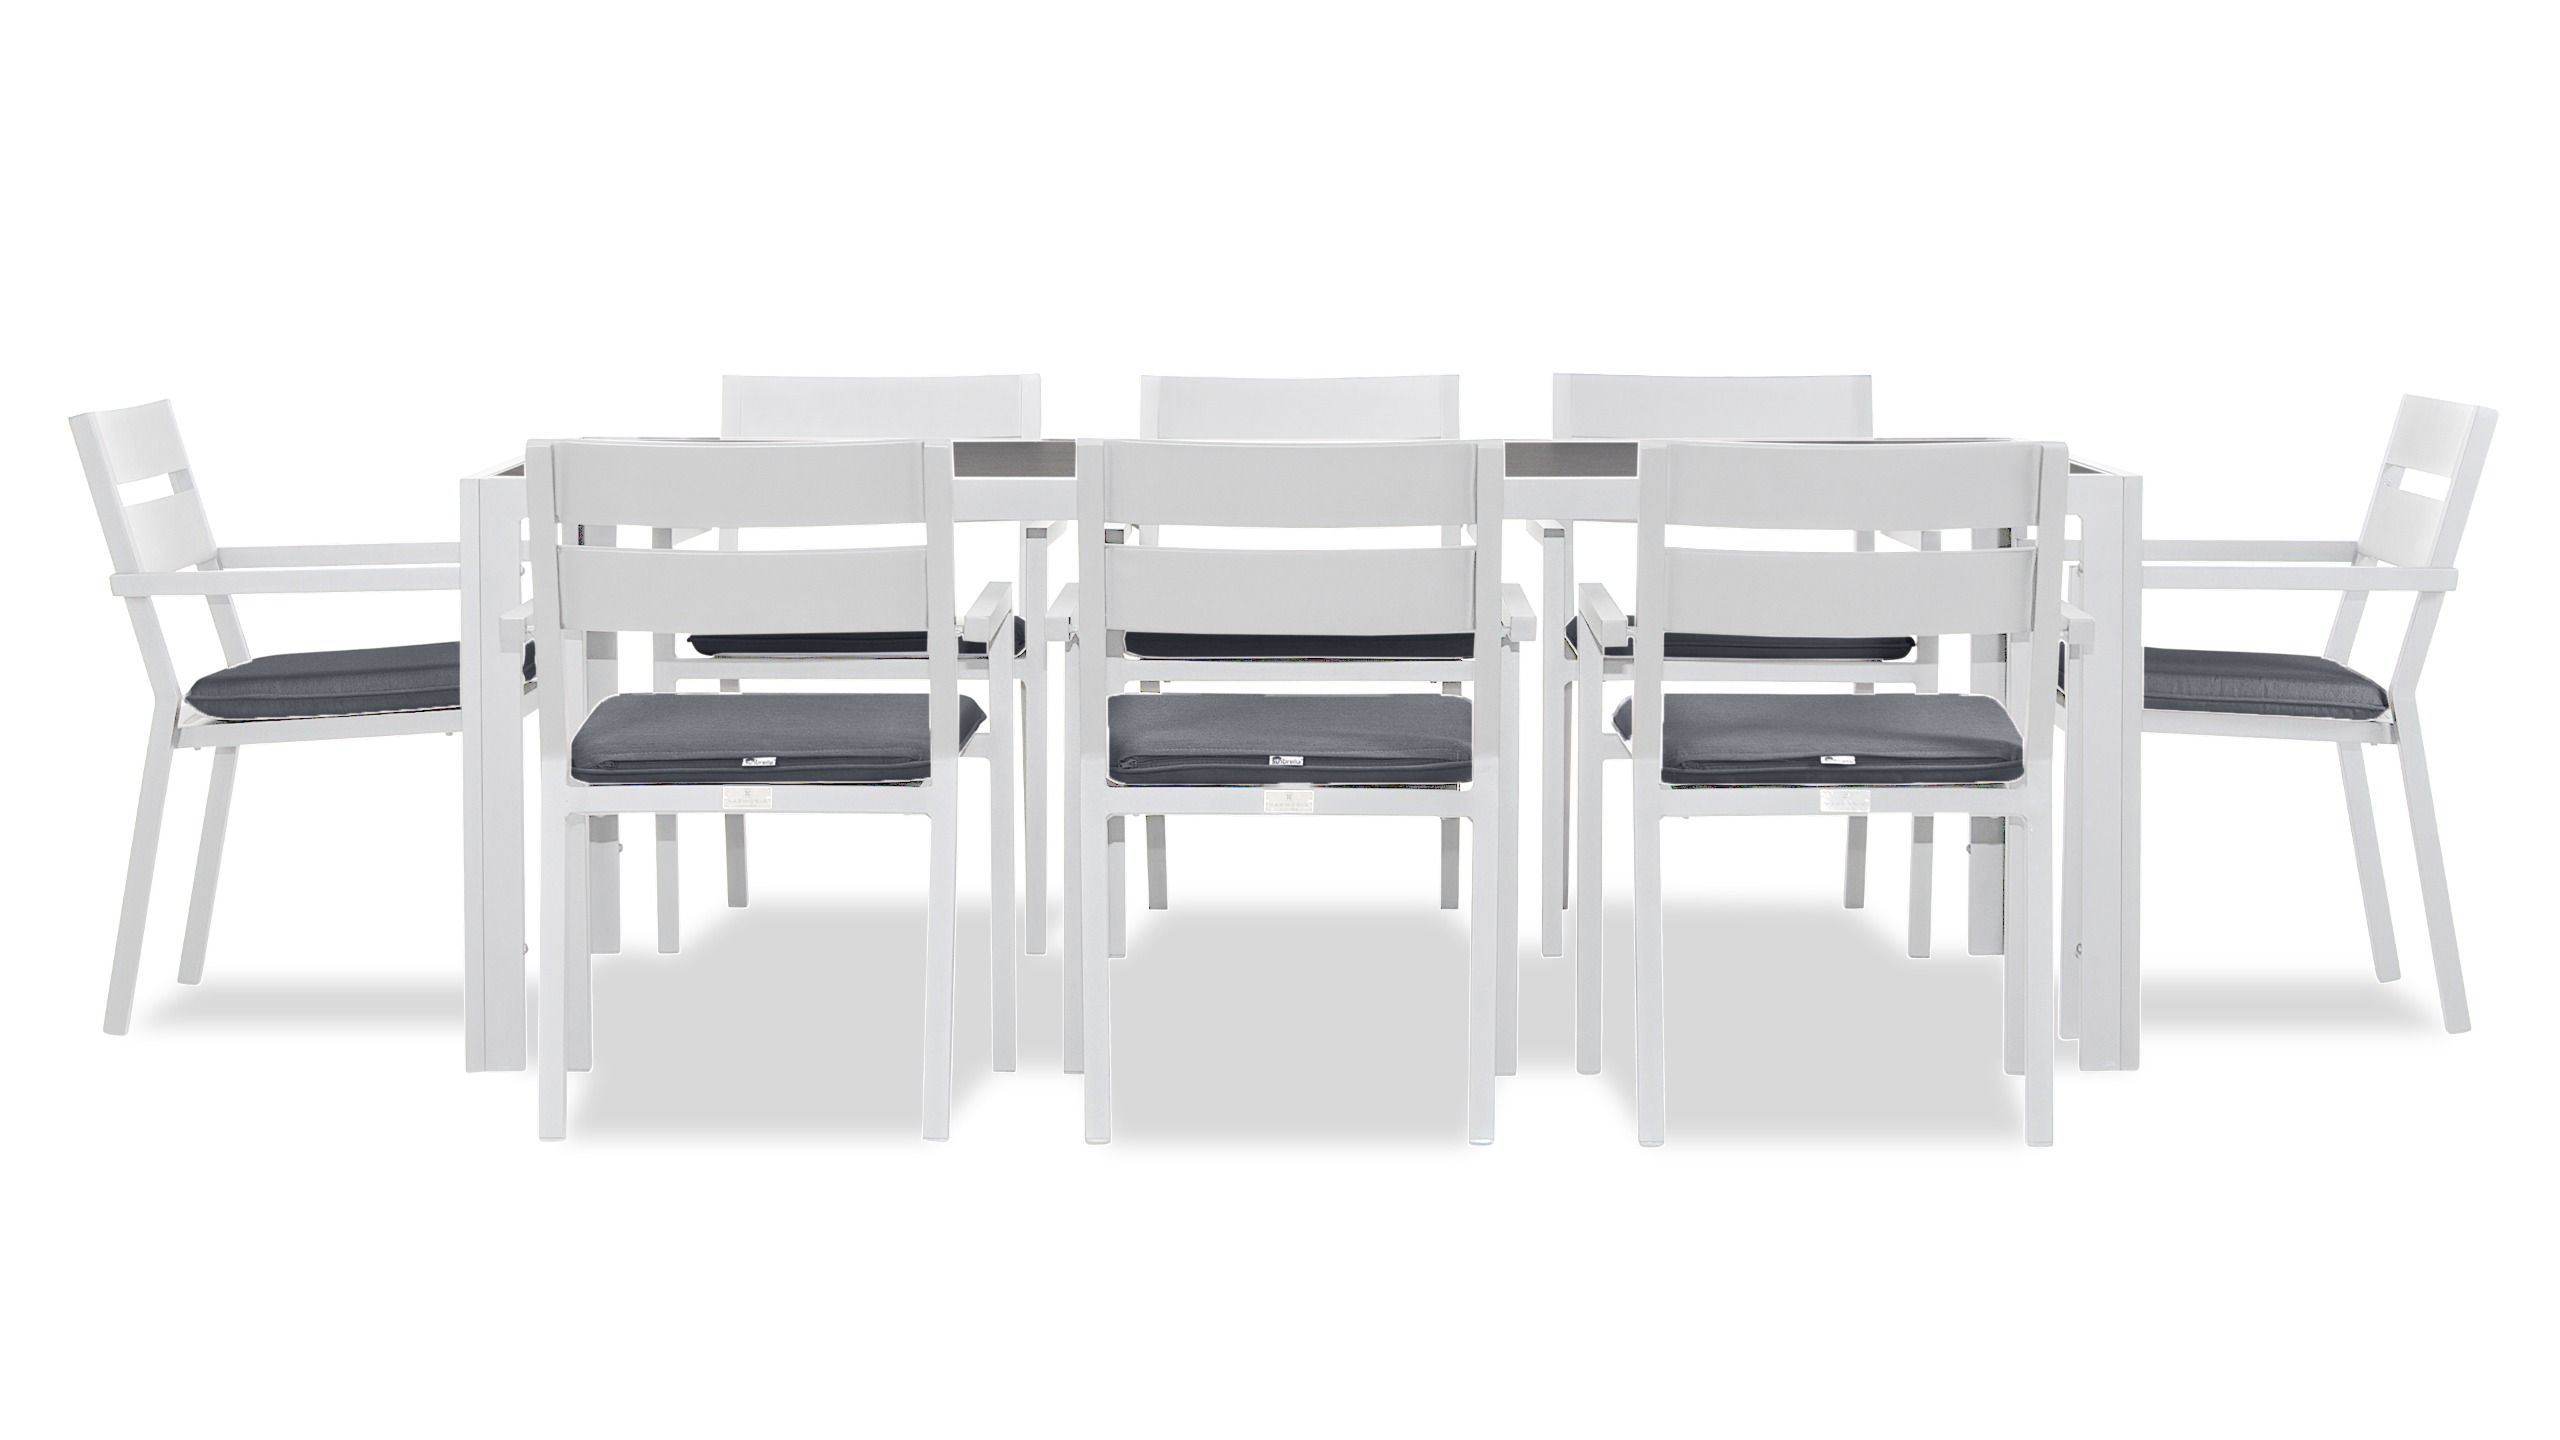 Harmonia Living - Pacifica 9 Piece Dining Set - White | HL-PAC-WHT-9DS